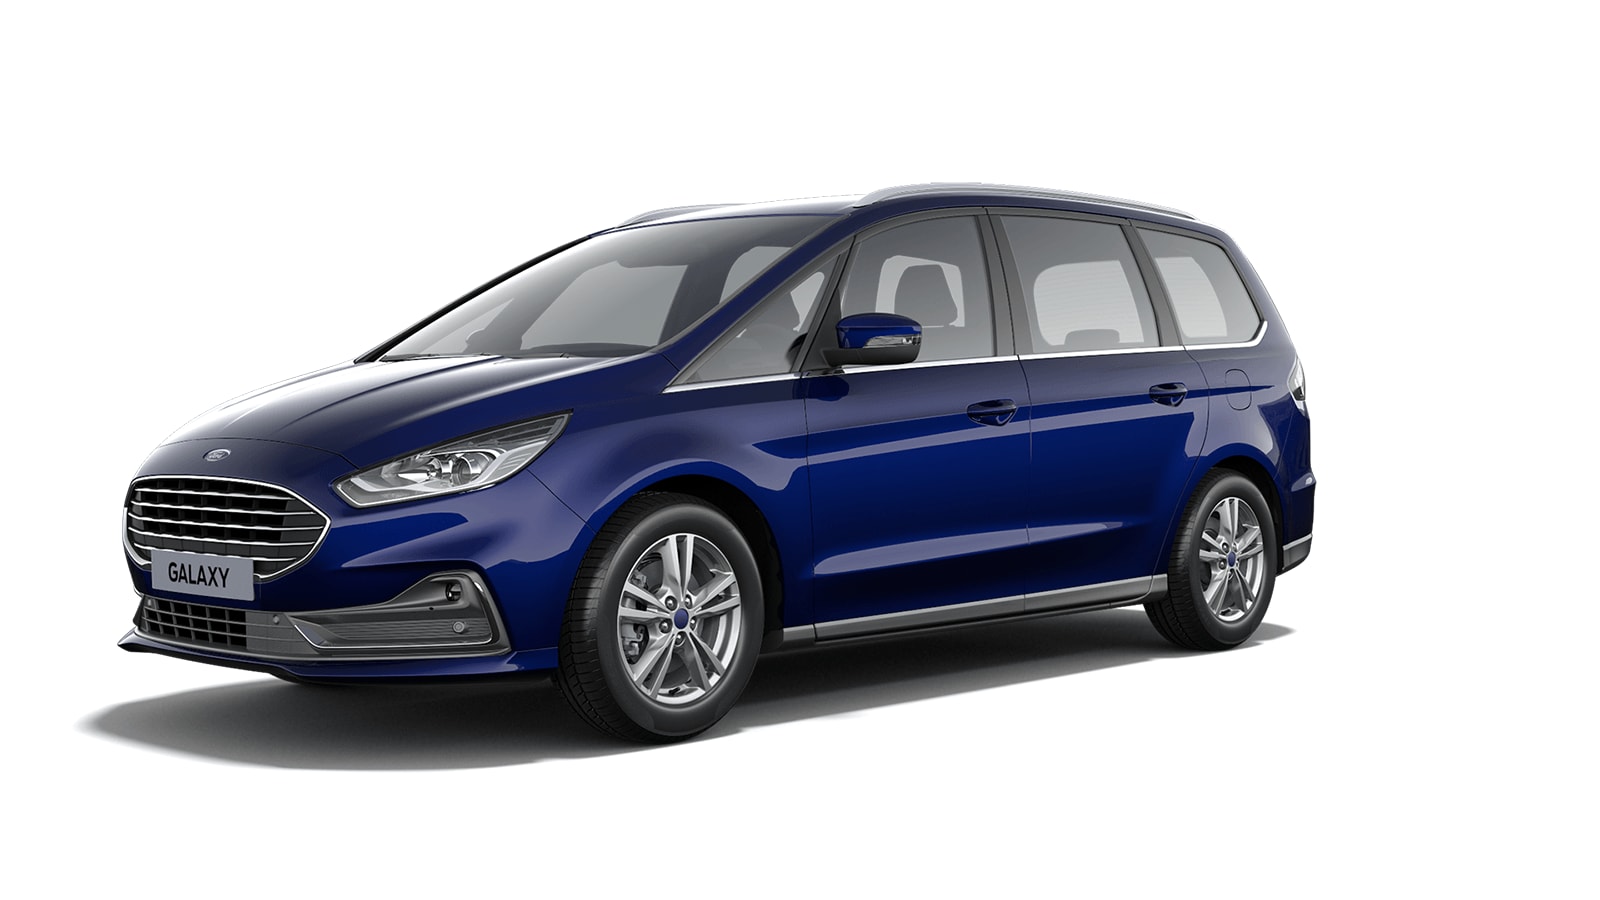 FORD GALAXY TITANIUM BUSINESS - Acheter voiture ford Brie Comte Robert, Offres véhicules neufs